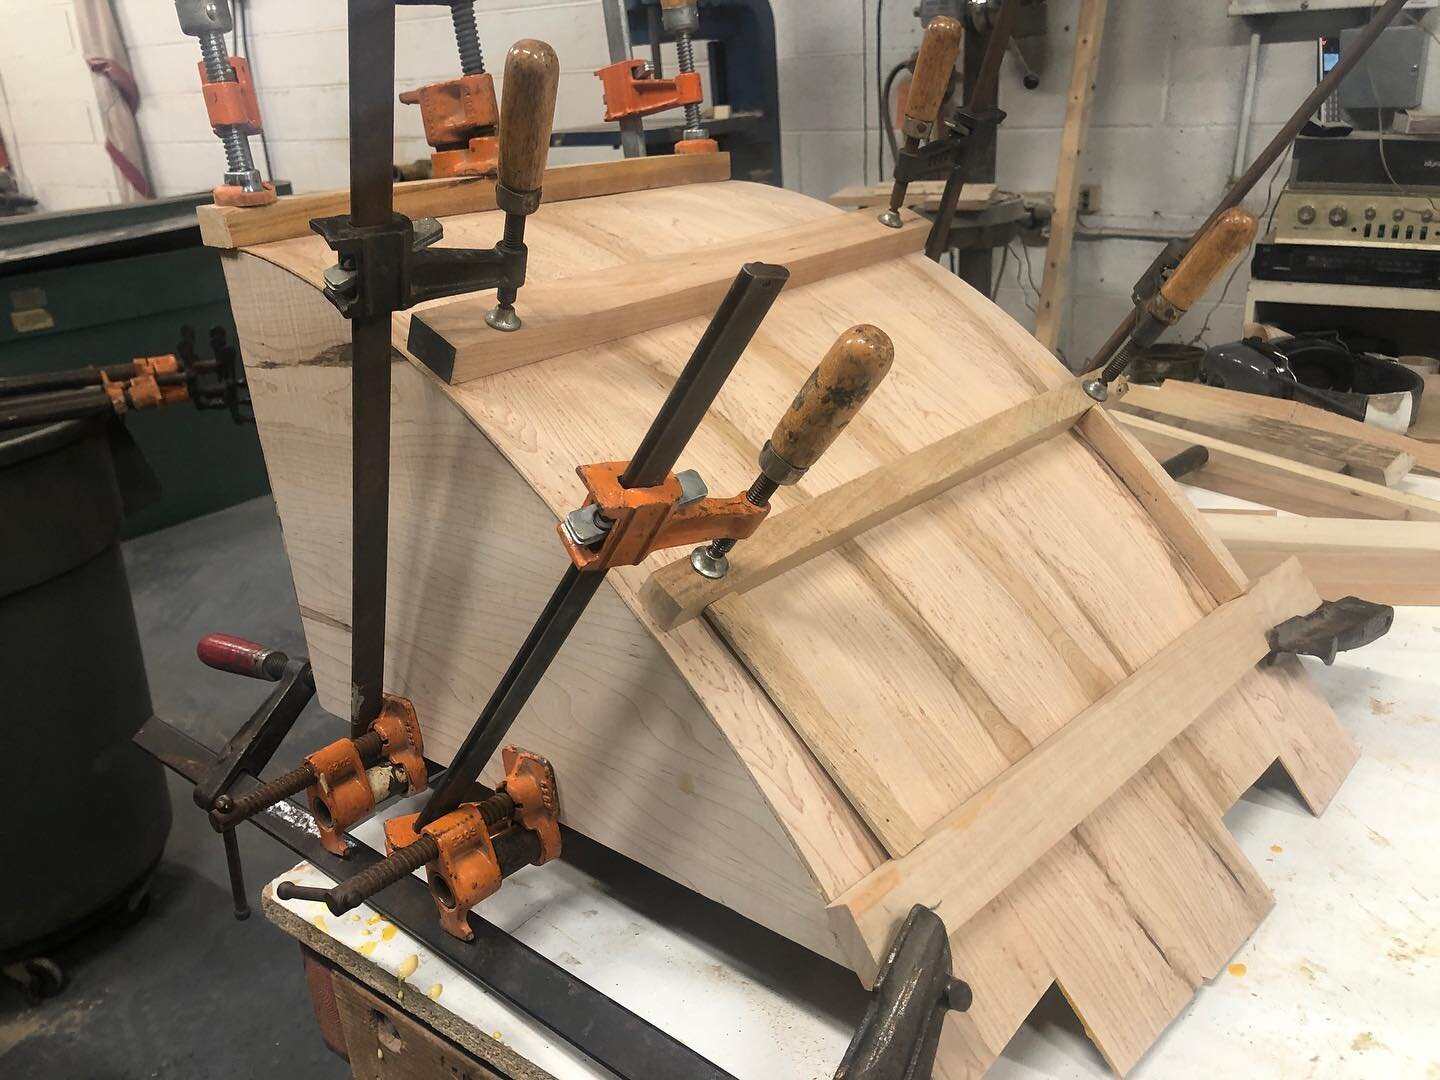 Current project is a big one! And this glue up was not easy. Going to be a while before it&rsquo;s done but can&rsquo;t wait to show you!
.
.
.
#woodworking #designer #furniture #manayunk #philadelphia